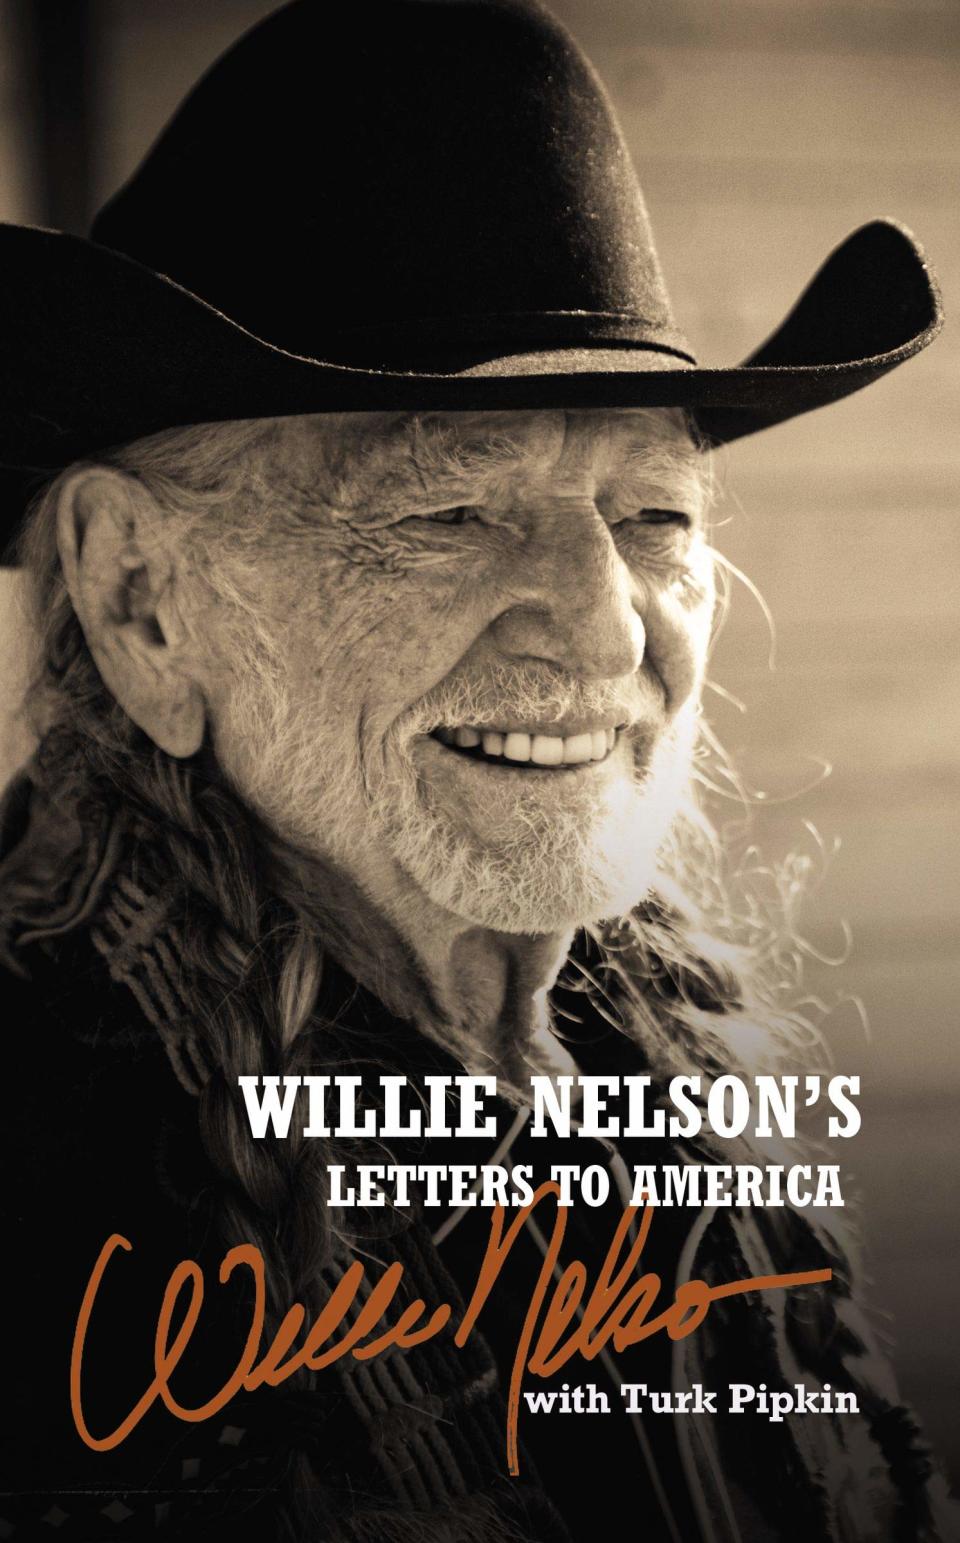 “Willie Nelson's Letters to America,” by Willie Nelson with Turk Pipkin.